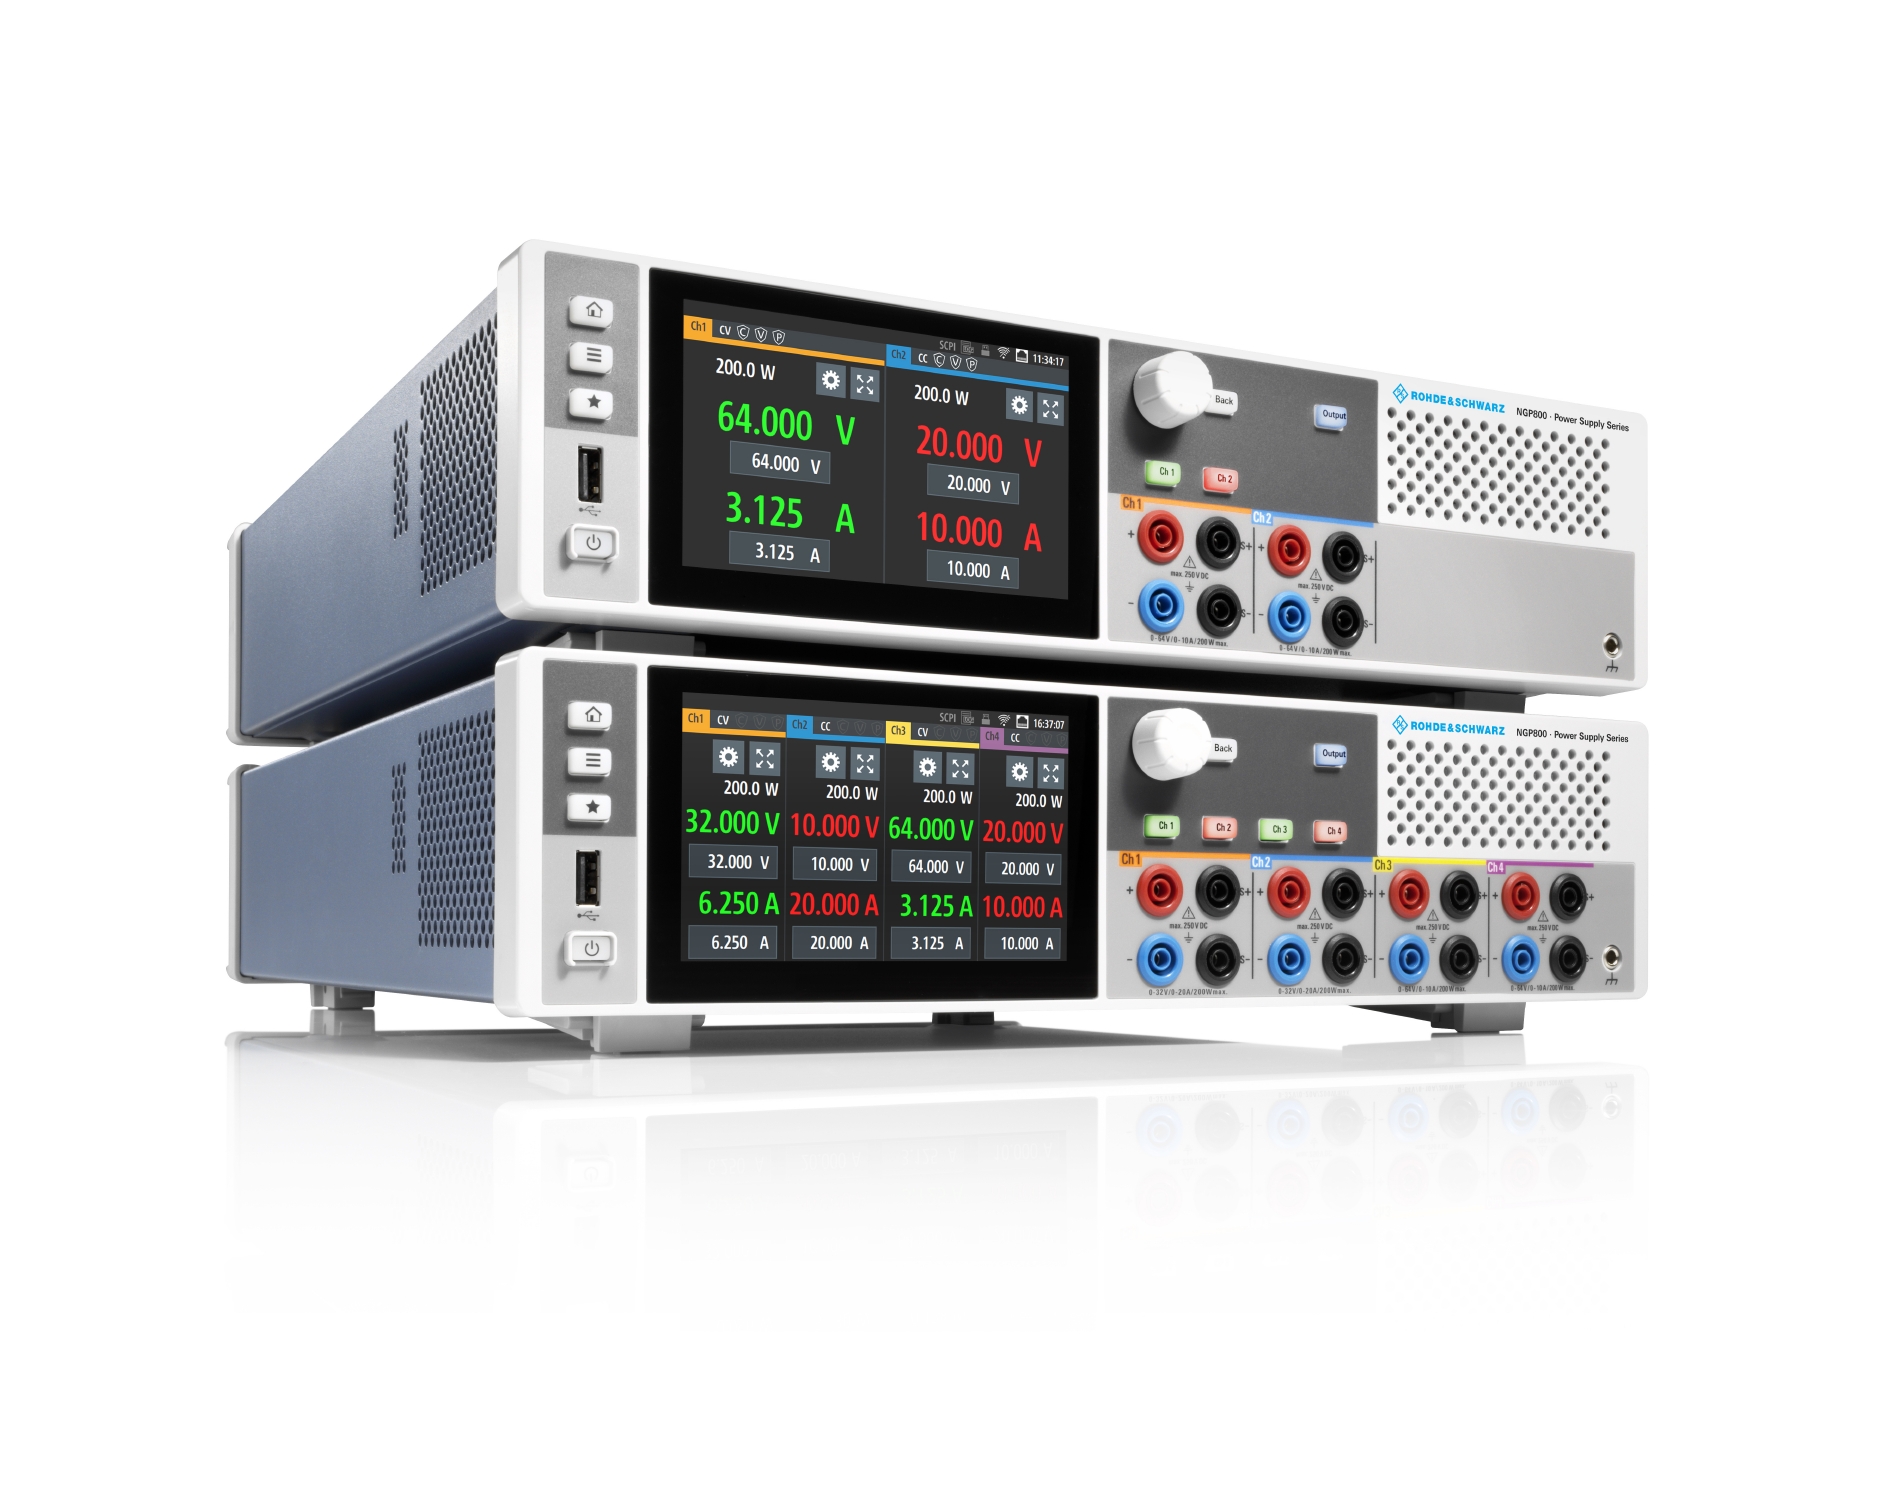 Power Supplies Boost Efficiency w/ Four Independent Channels